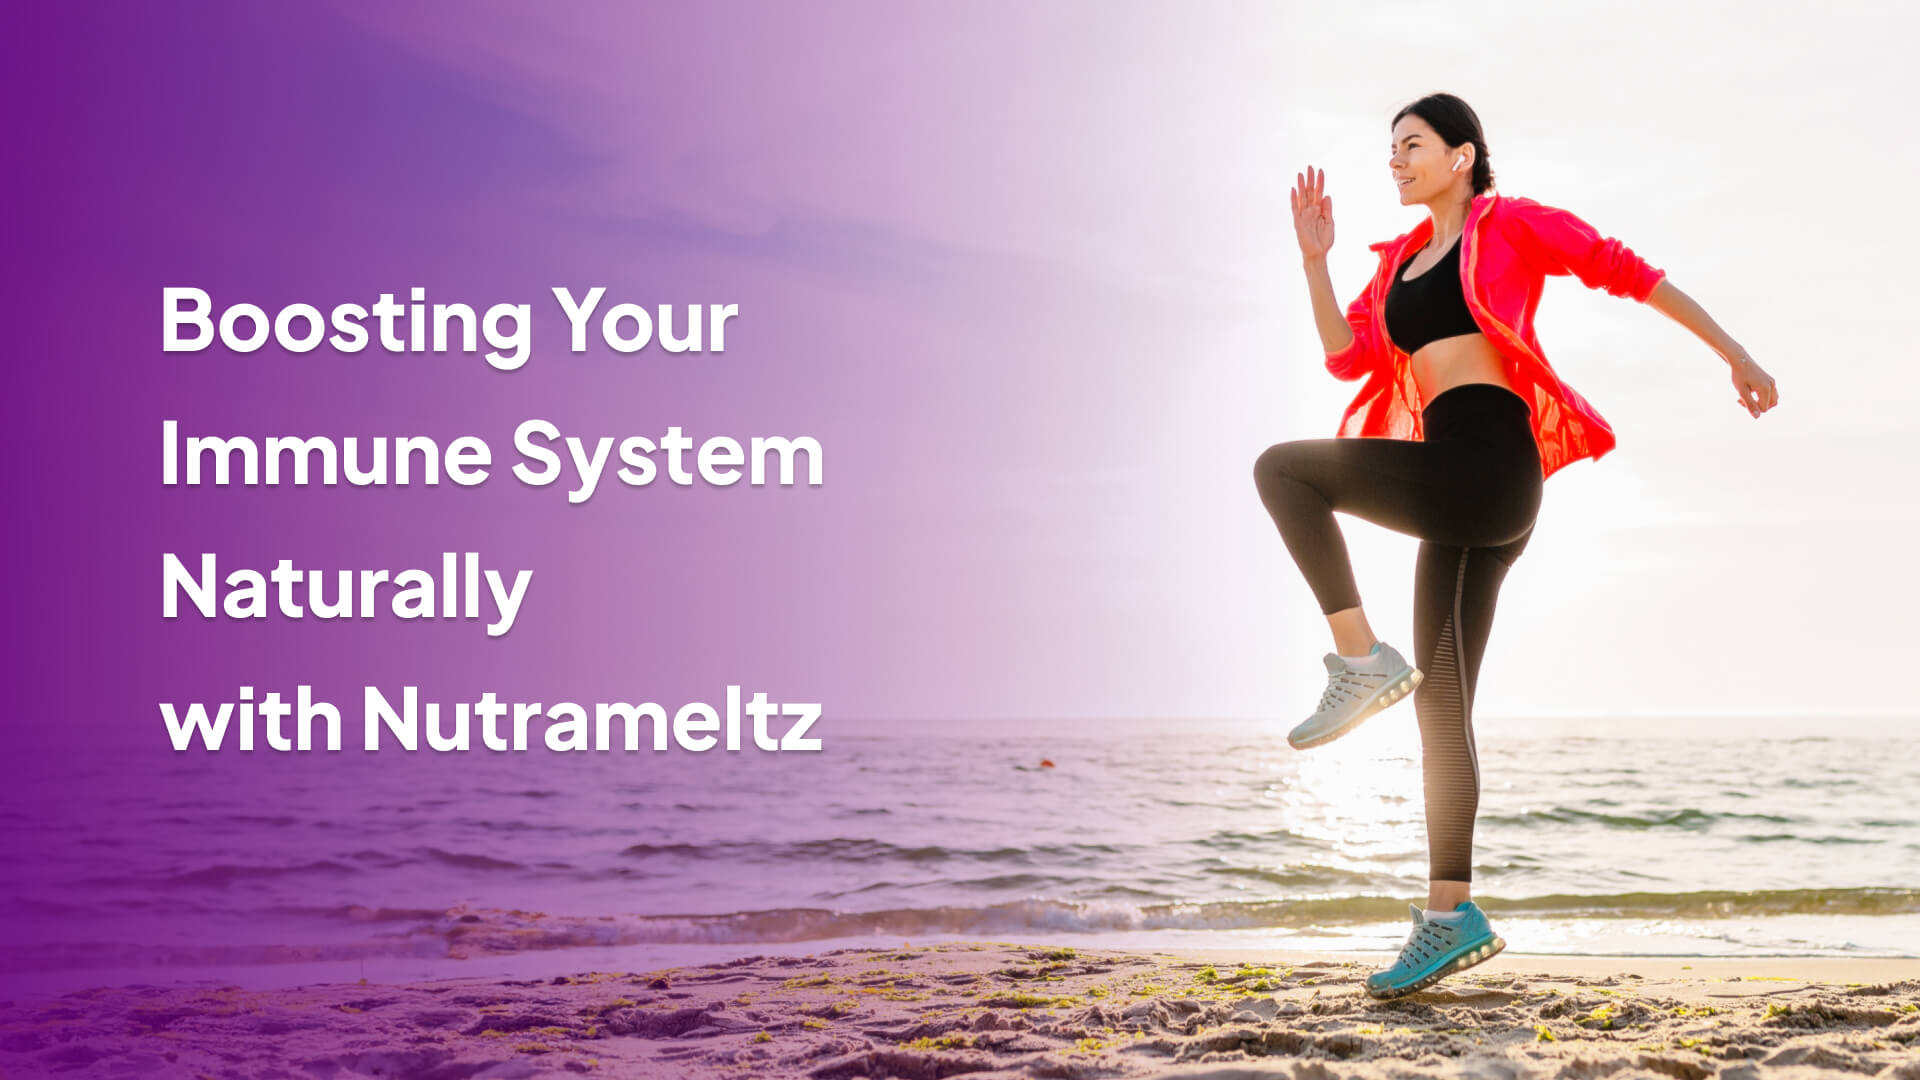 Boosting Your Immune System Naturally with NutraMeltz